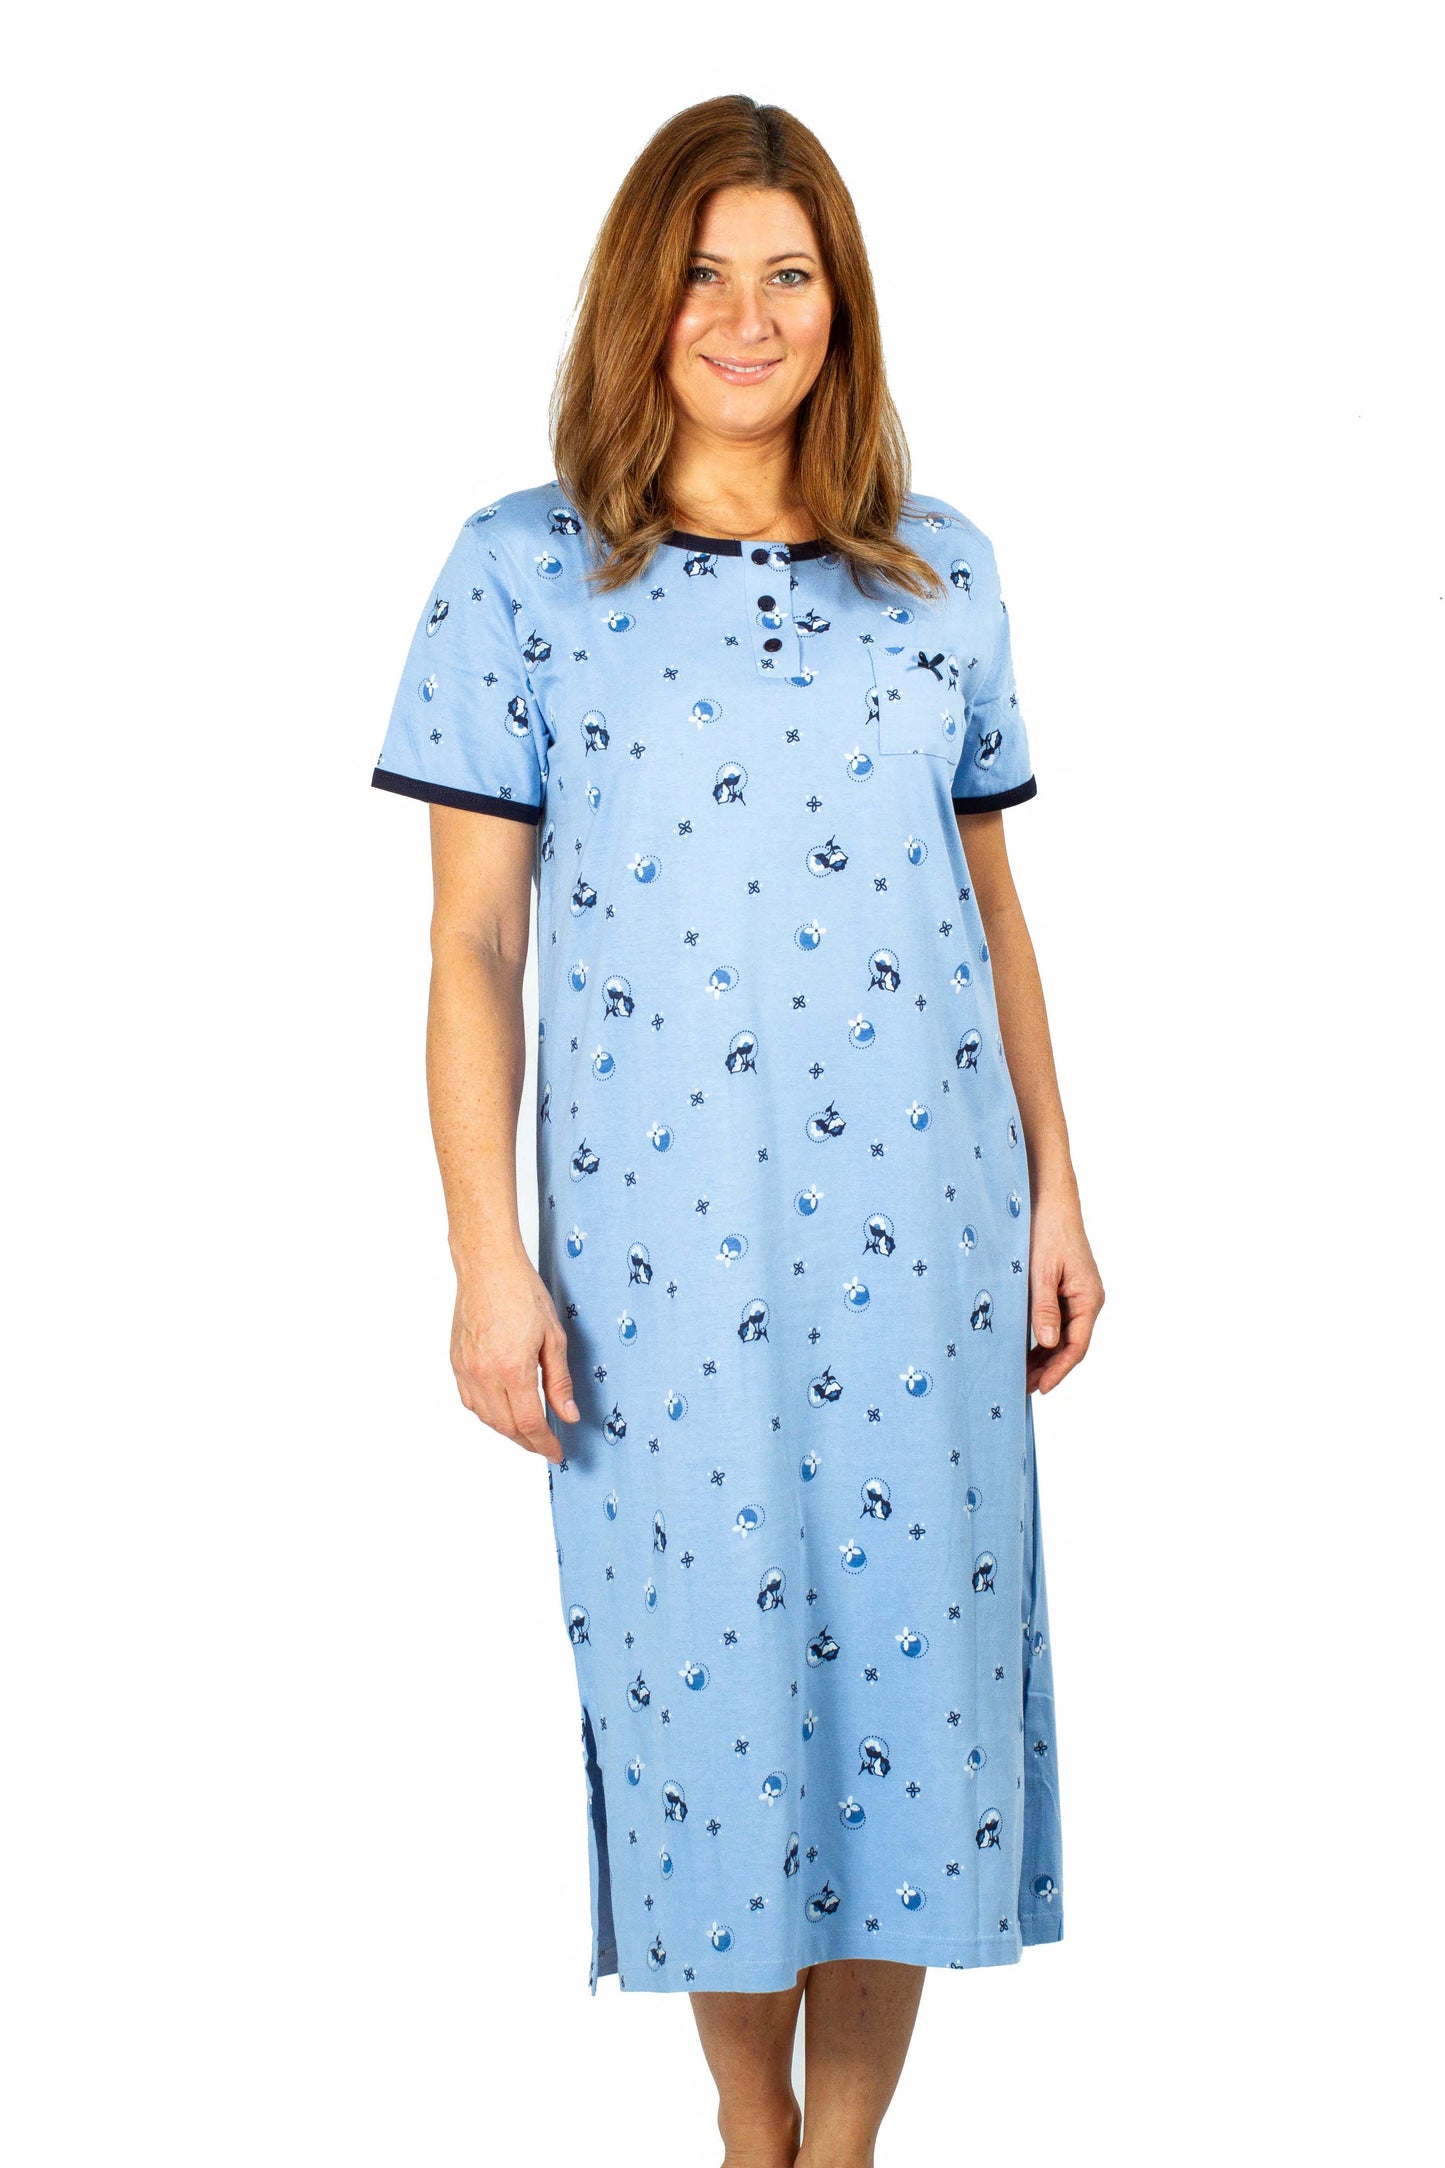 100% Cotton Jersey 48" Long Nightgown 2020231 - Blue